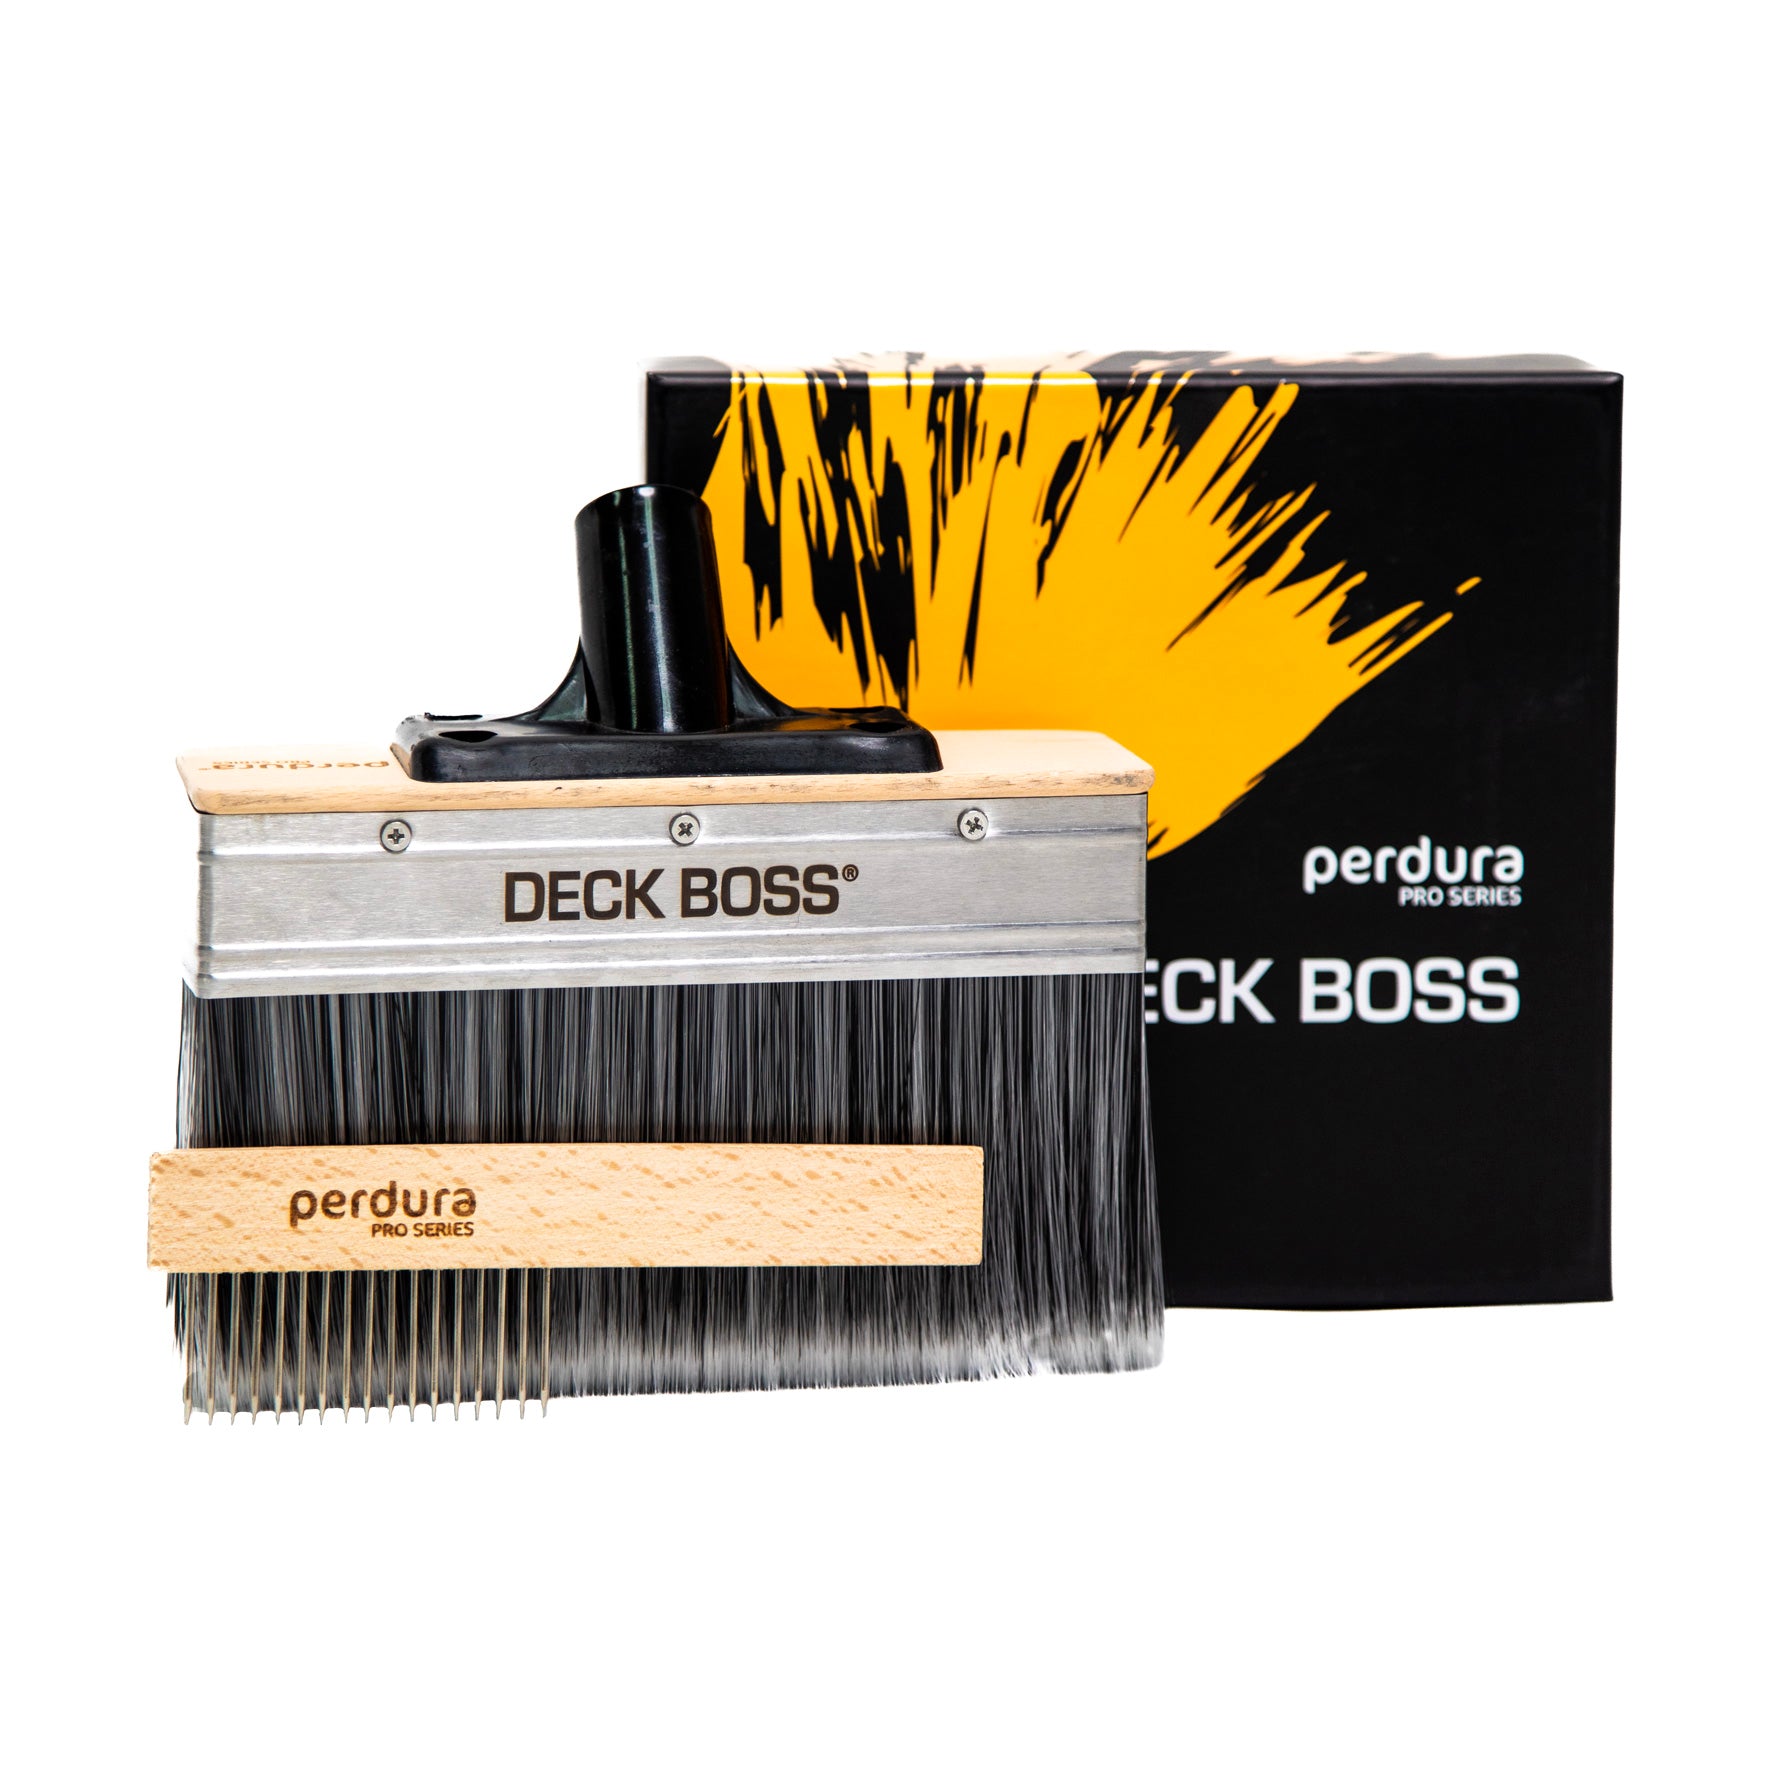 Deck Stain Brush Applicator - Deck Boss by Perdura - 7 inch Paint Brush - Stain Seal and Paint for Floor and Fence - Brush Tool for Water and Oil